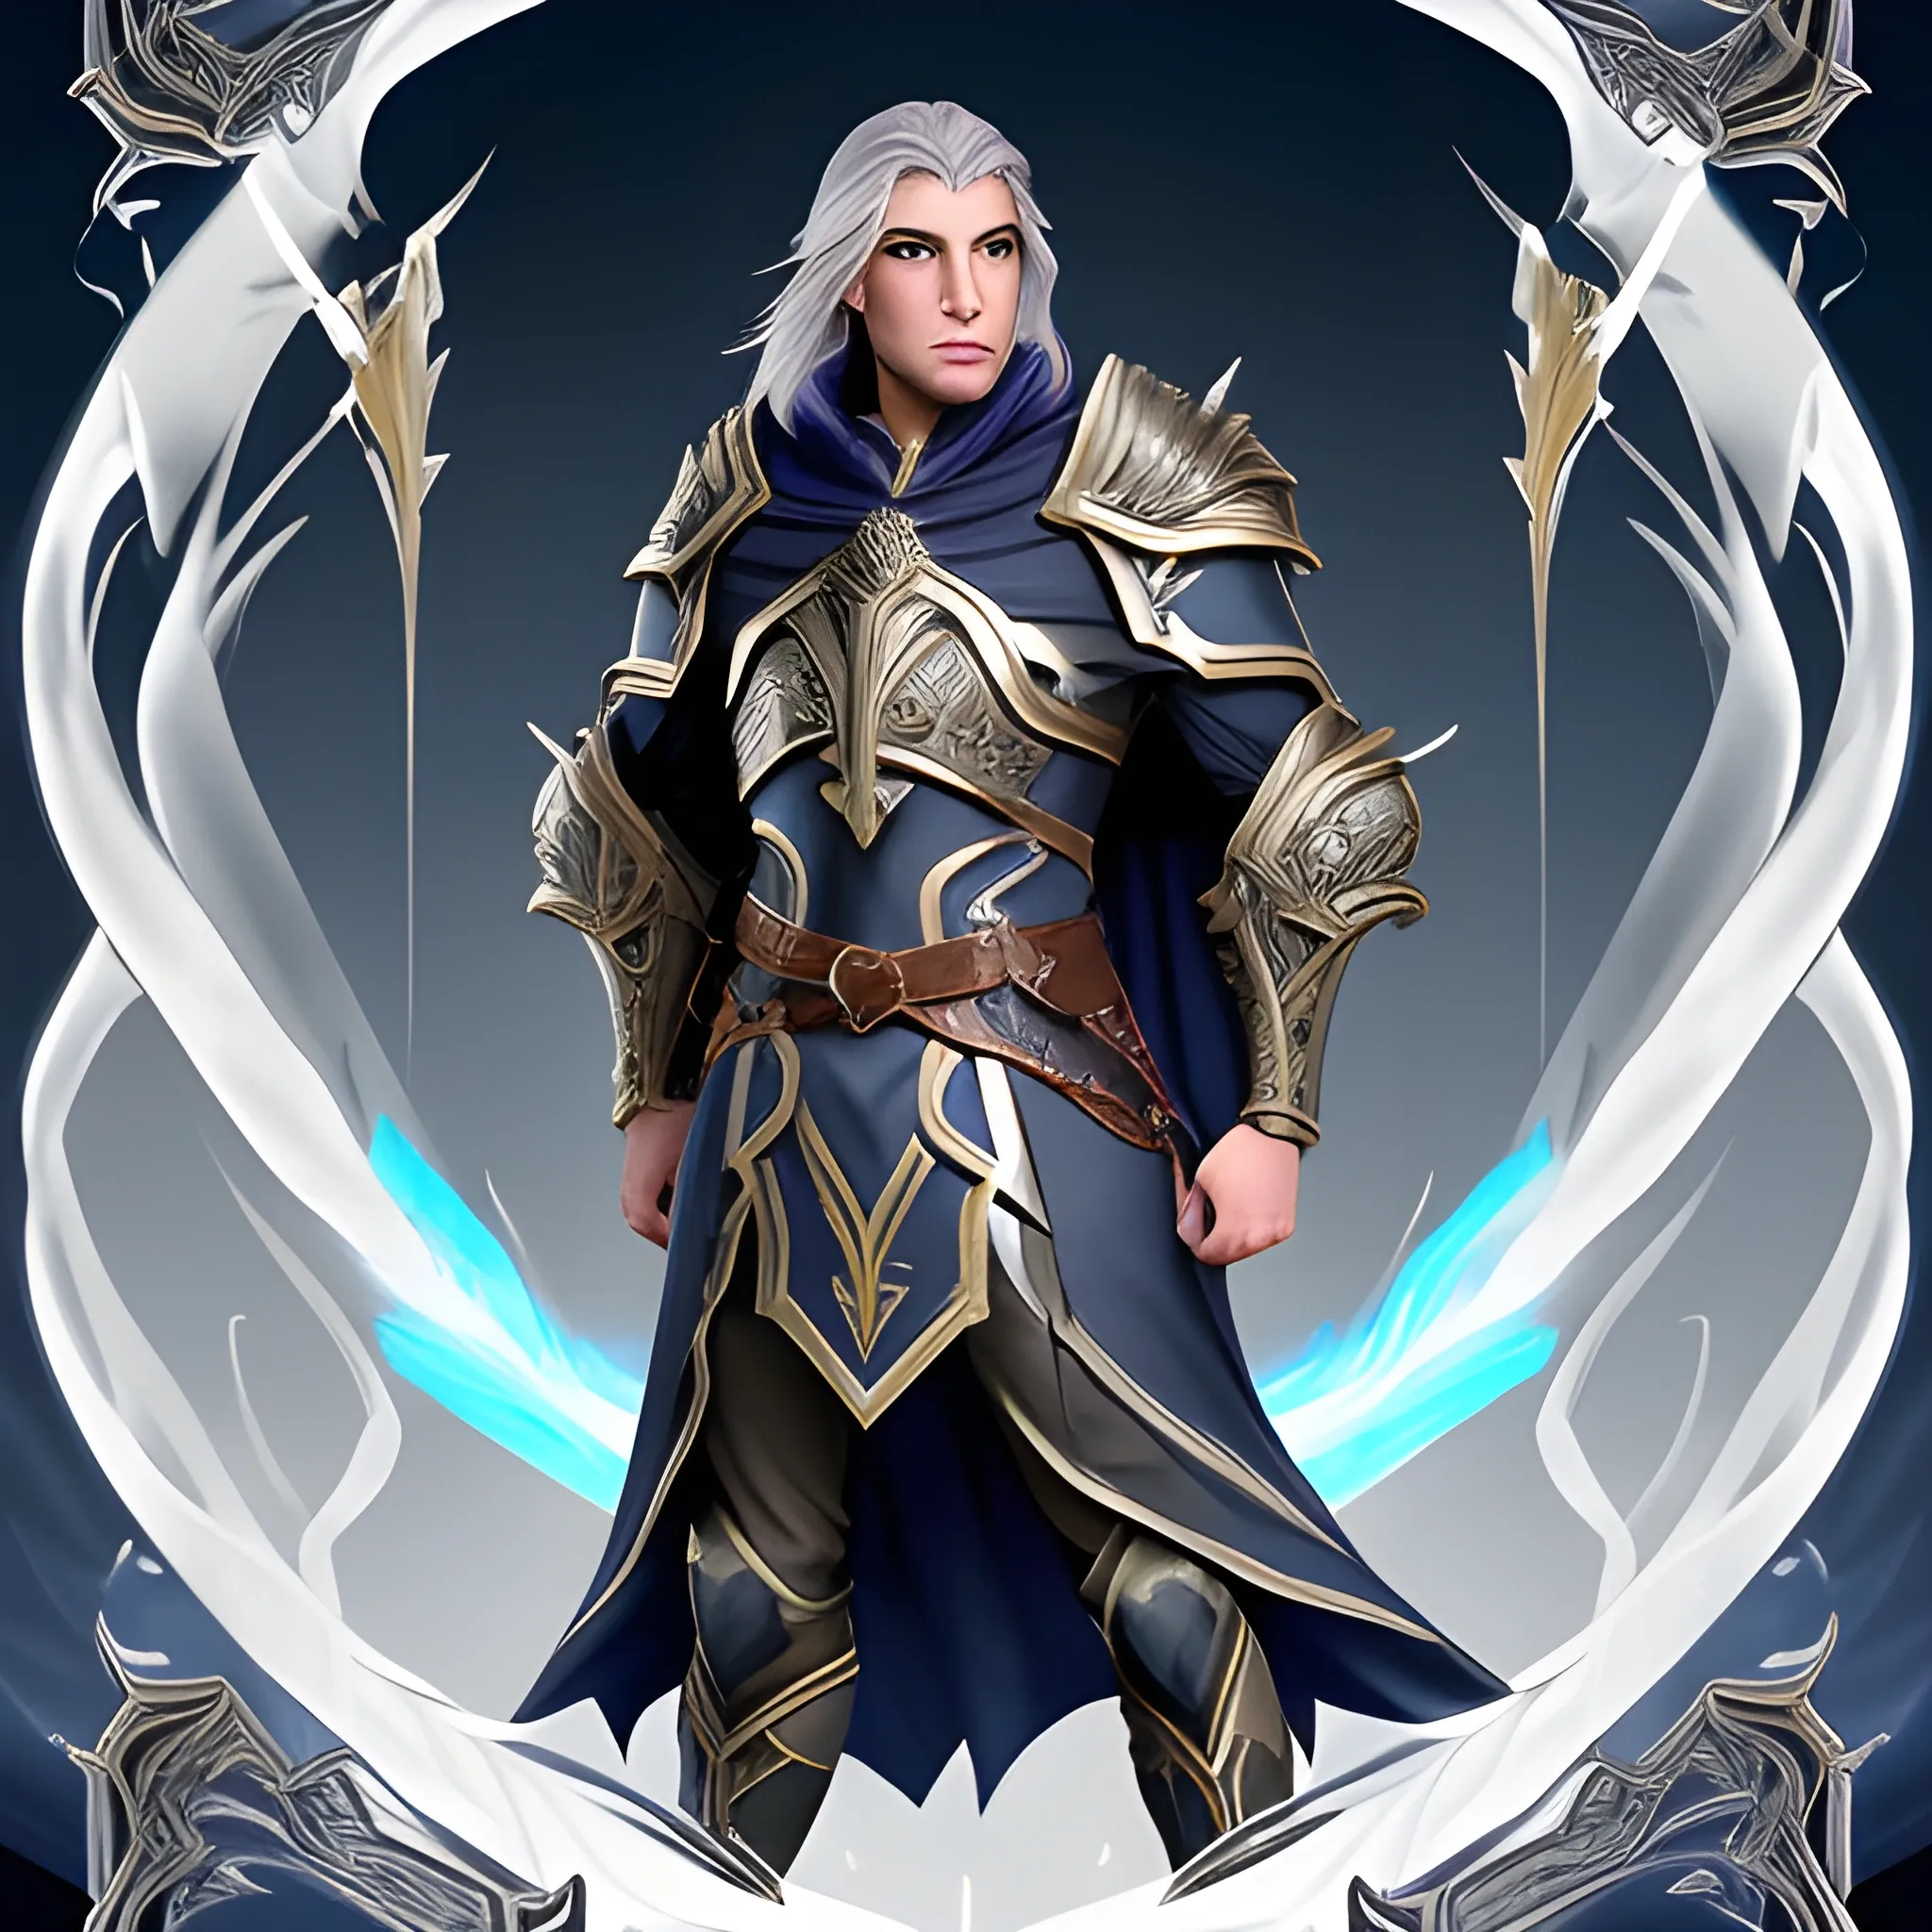 Kaelen Stormrider, a male half-elf paladin, possesses a commanding presence and a striking combination of elven grace and human strength. Here is a description of his appearance and demeanor:

Standing at an impressive height, Kaelen carries himself with an air of confidence and nobility. His physique combines the refined features of his elven heritage with the robustness inherited from his human lineage. Though lean and athletic, his frame reveals underlying strength, a testament to his dedication to his martial training.

Kaelen's fair complexion bears a touch of warmth, reflecting both his elven and human ancestry. His face is characterized by sharp yet gentle features, accentuated by a chiseled jawline and high cheekbones. His captivating eyes, a piercing shade of stormy gray or deep blue, reveal a depth of conviction and determination.

His hair, often styled in a swept-back manner, falls in waves or locks that resemble the tempestuous sea. The color can vary, ranging from a dark chestnut brown to a silvery hue reminiscent of moonlight reflecting off water. It flows freely, occasionally catching the light and accentuating his every movement.

Kaelen's attire reflects his devotion to his paladin oath and his quest for righteousness. He wears polished, gleaming plate armor adorned with intricate engravings and symbols representing his deity or personal convictions. Over his armor, he may don a flowing, azure-colored cloak, emblazoned with the emblem of his order or the symbol of the storm.

His demeanor is one of unwavering resolve and compassionate determination. Kaelen's eyes hold a spark of idealism, tempered by the wisdom gained from his experiences. He exudes a natural charisma, with a voice that resonates with conviction and inspires those around him.

The mark of his paladinhood may be visible on his person, such as a holy symbol or a sigil representing his chosen deity. It serves as a reminder of his sacred duty and the divine powers that guide him in his quest to protect the innocent and vanquish evil.

Kaelen Stormrider's appearance, combining the grace of his elven heritage with the strength of his human lineage, mirrors his inner dedication to righteousness and his unwavering commitment to his sworn oath as a paladin.